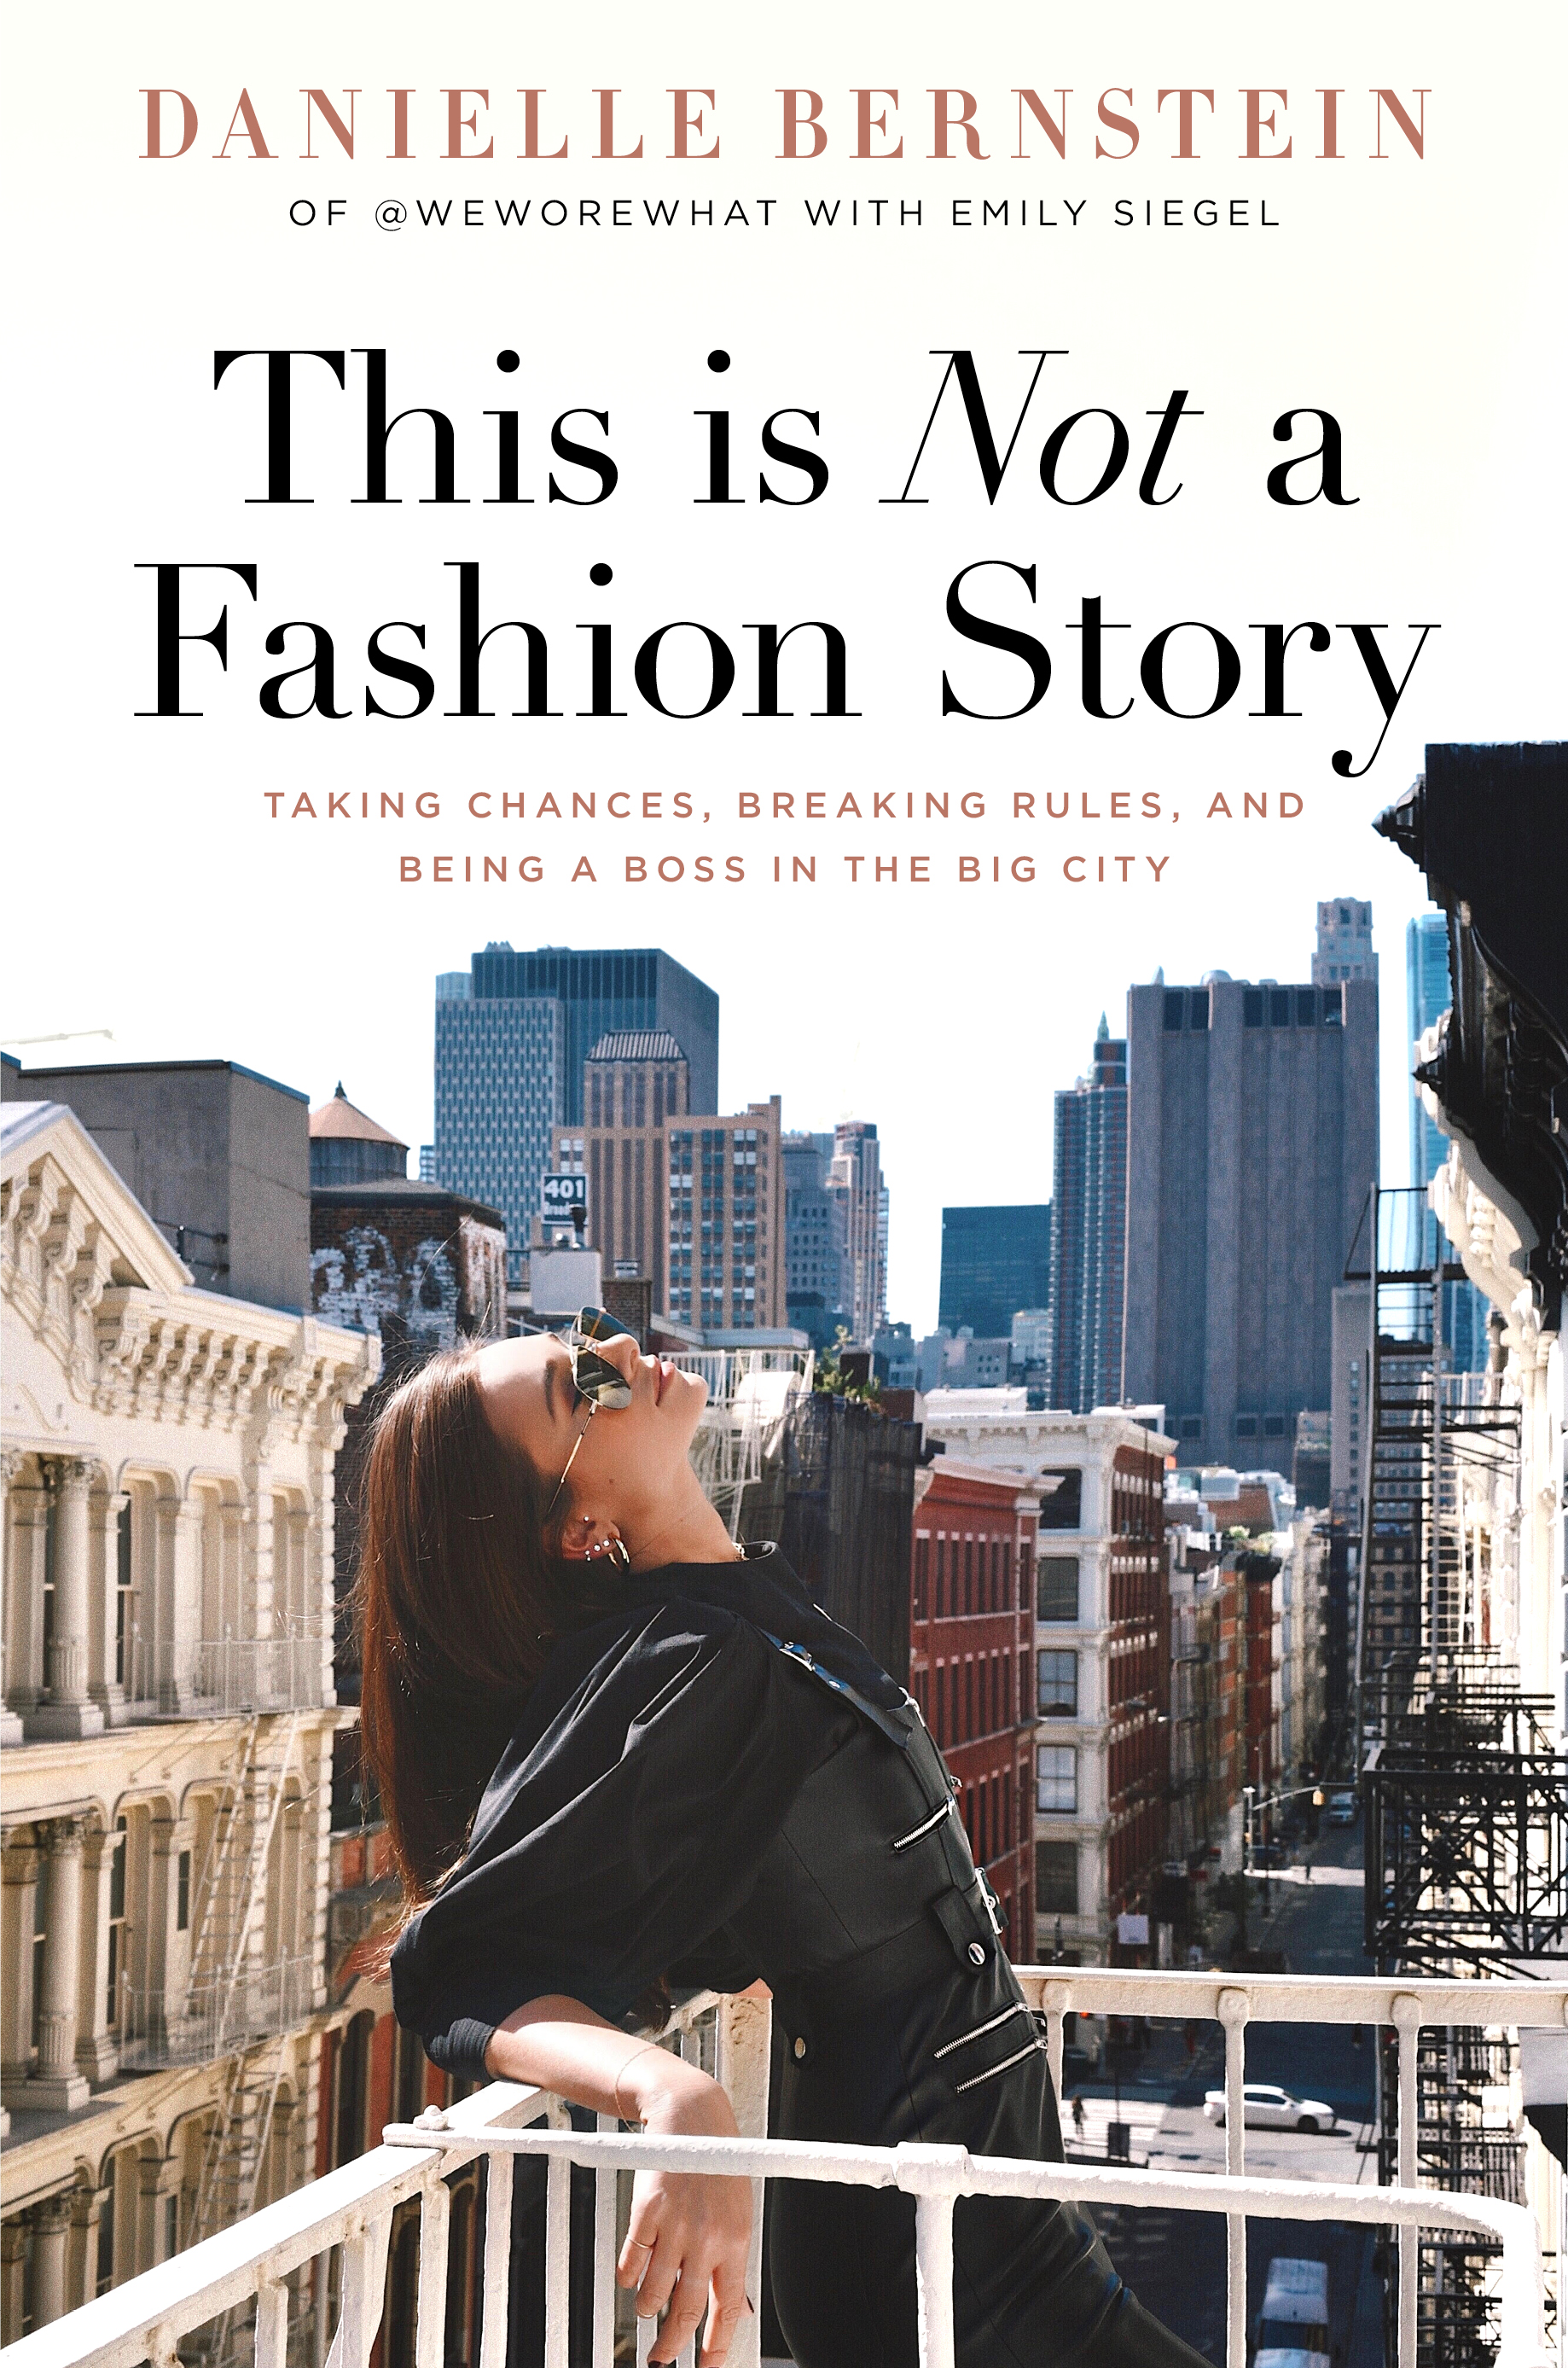 This is Not a Fashion Story: Taking Chances, Breaking Rules, and Being a Boss in the Big City by Danielle Bernstein with Emily Siegel